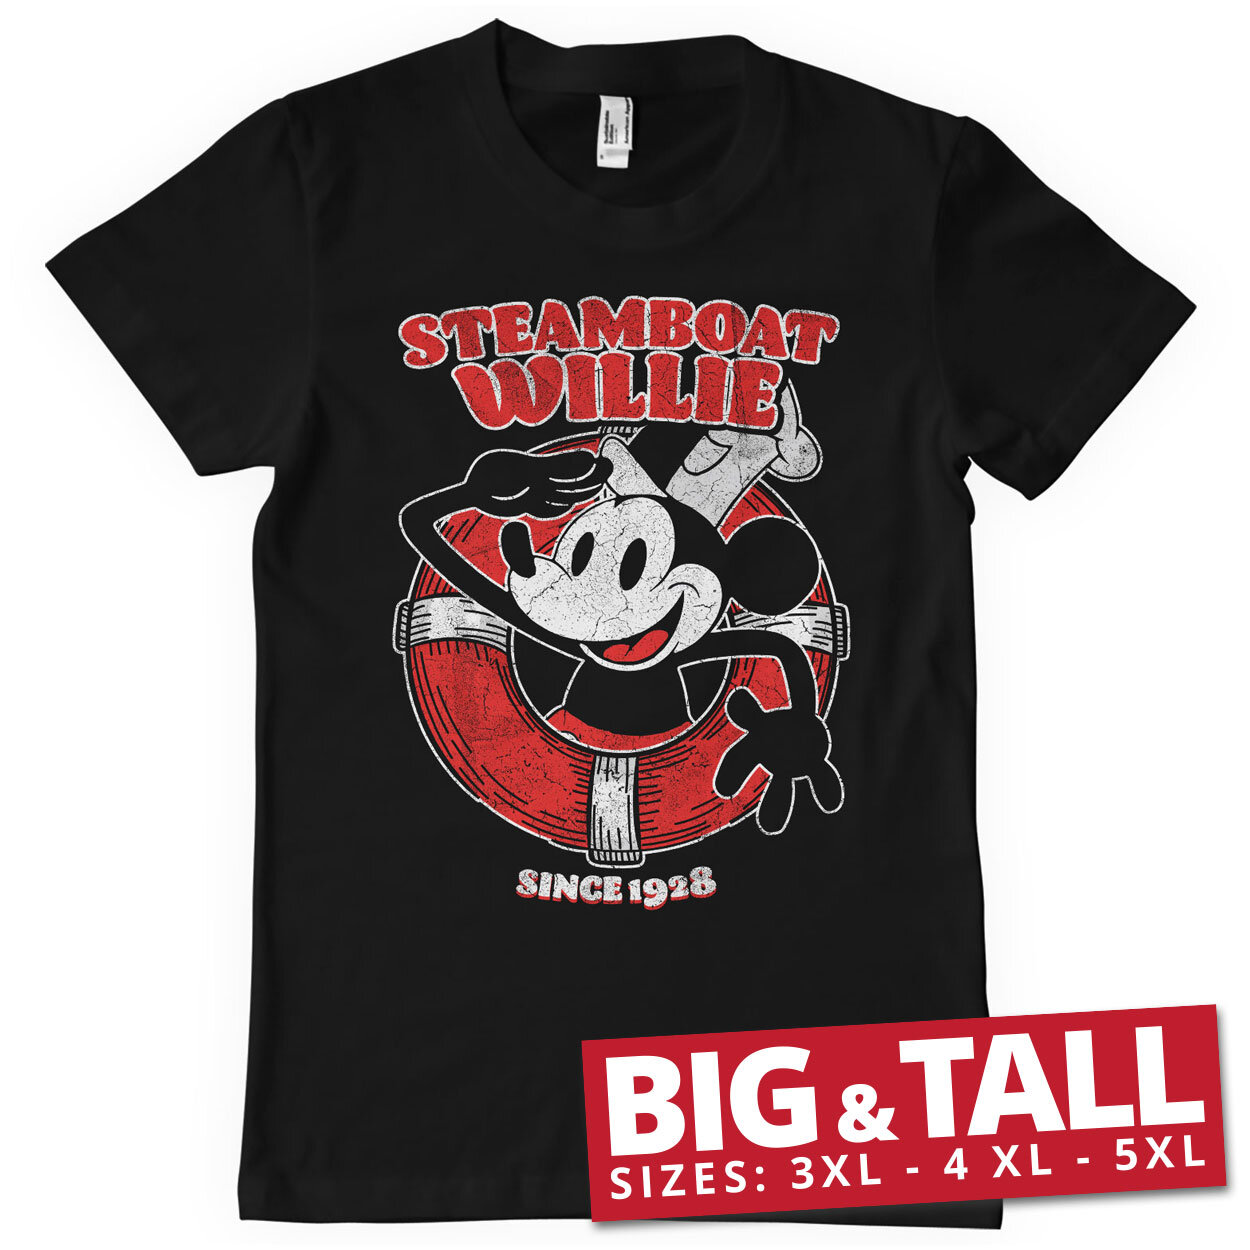 Steamboat Willie Since 1928 Big & Tall T-Shirt